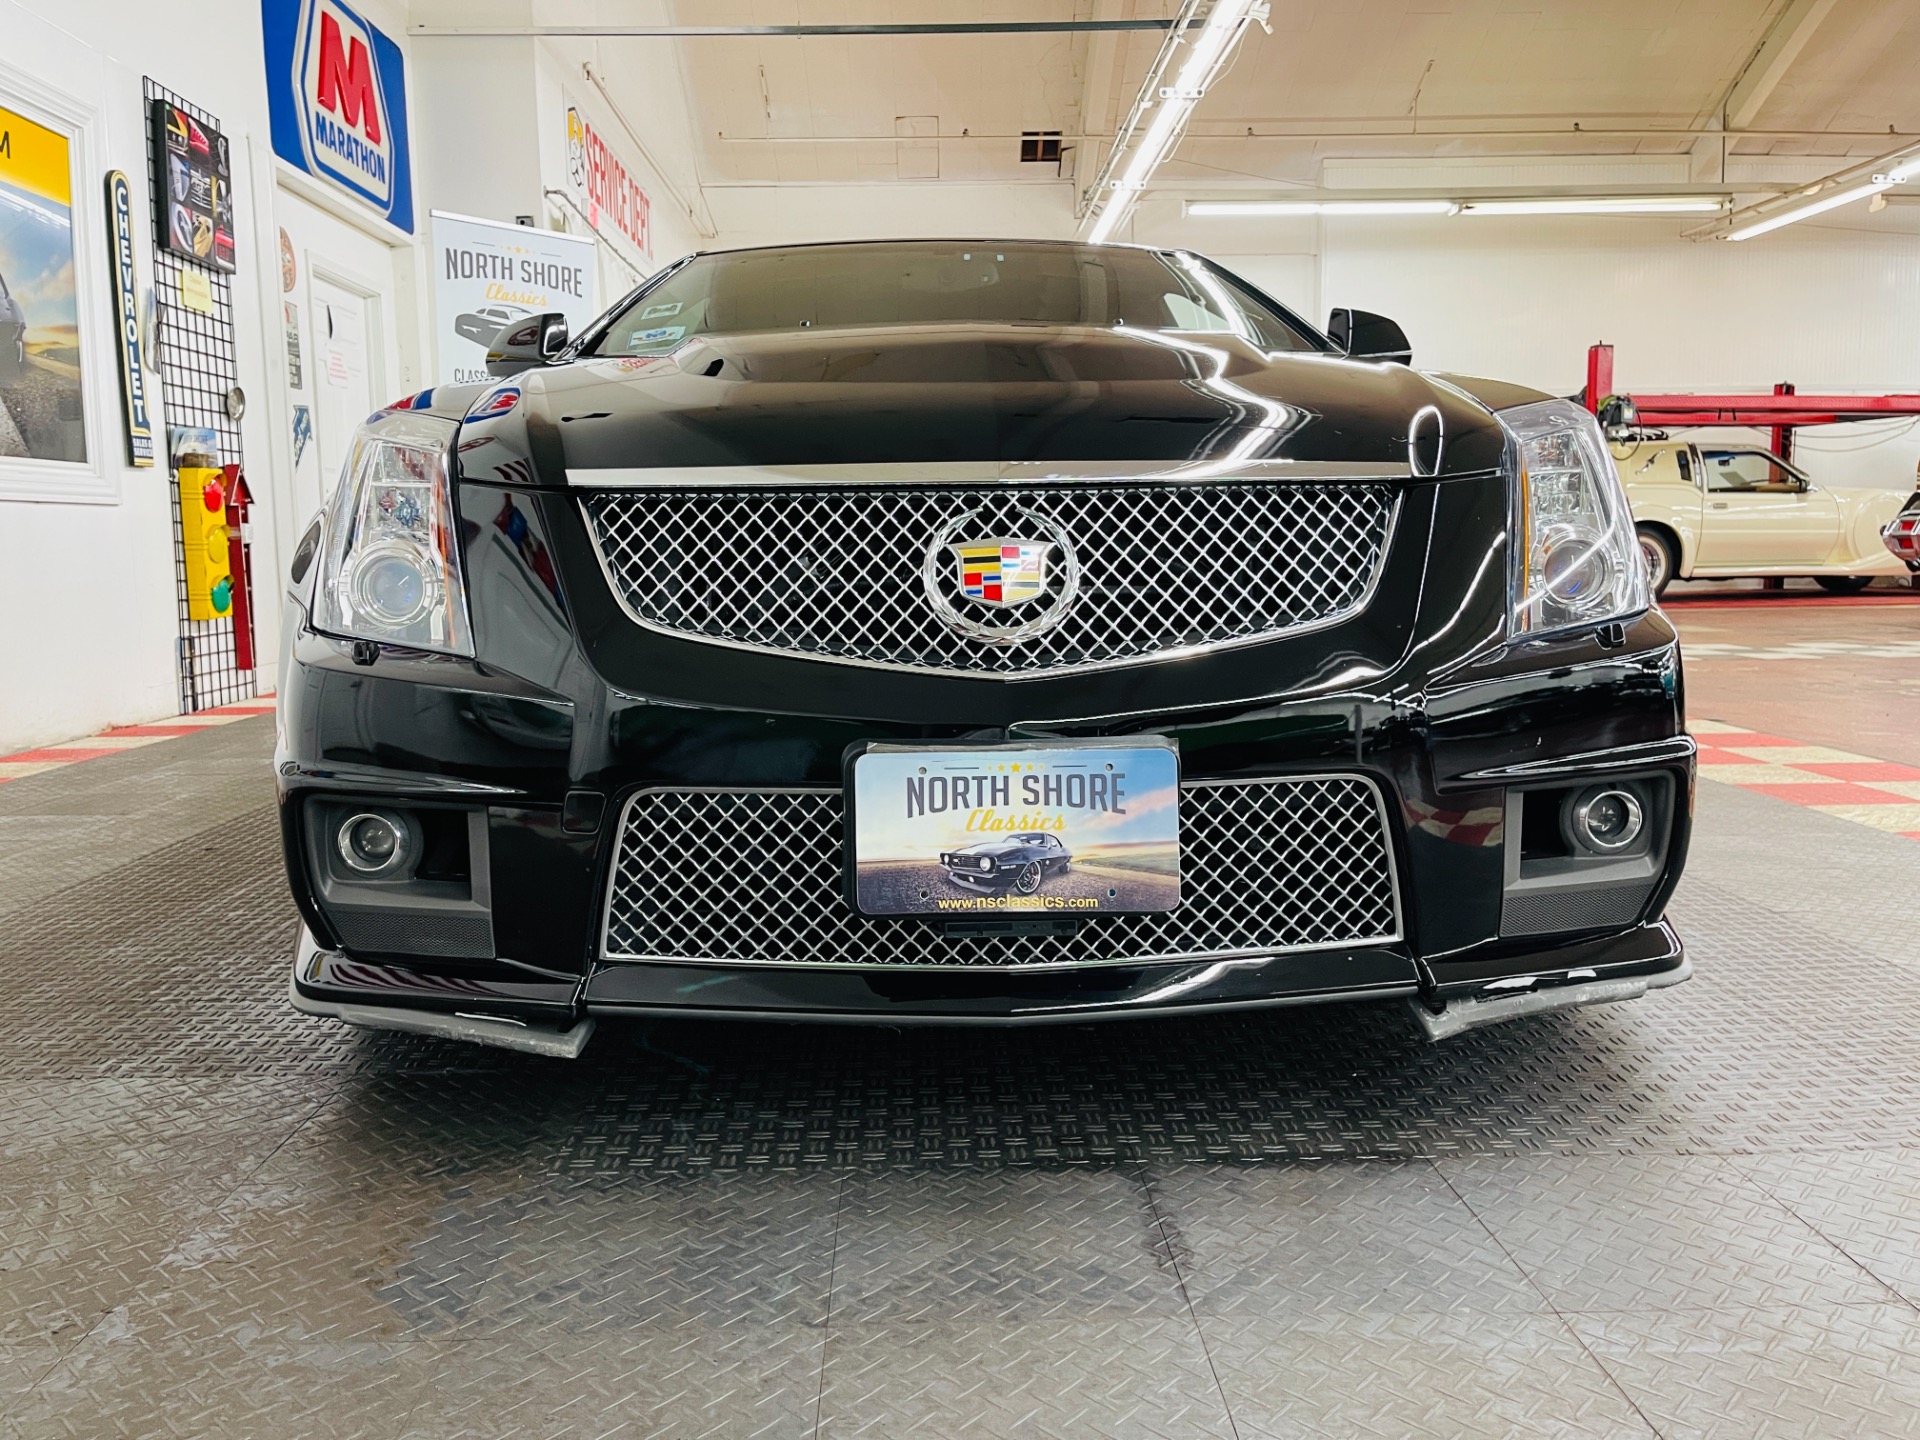 Used 2011 Cadillac CTS-V - LOW MILES - SUPERCHARGED - SUPER CLEAN - SEE VIDEO | Mundelein, IL